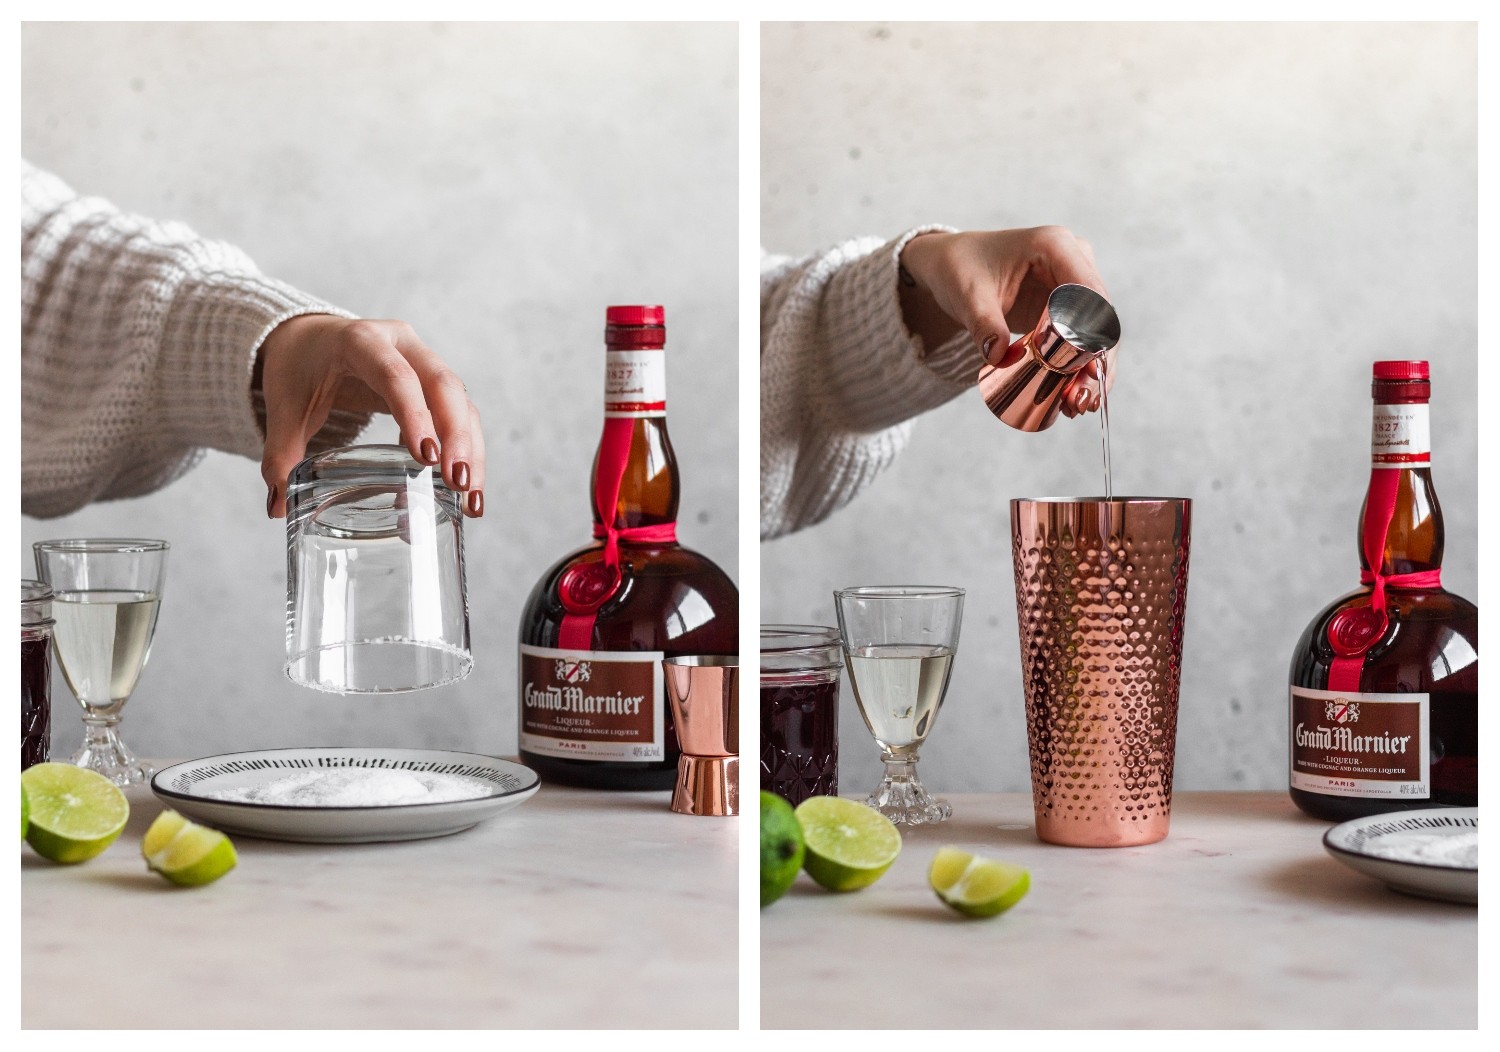 Two images; on the left, a woman's hand is dipping the rim of a glass into a plate of salt on a marble table. On the right, a woman's hand is pouring tequila into a copper cocktail shaker.